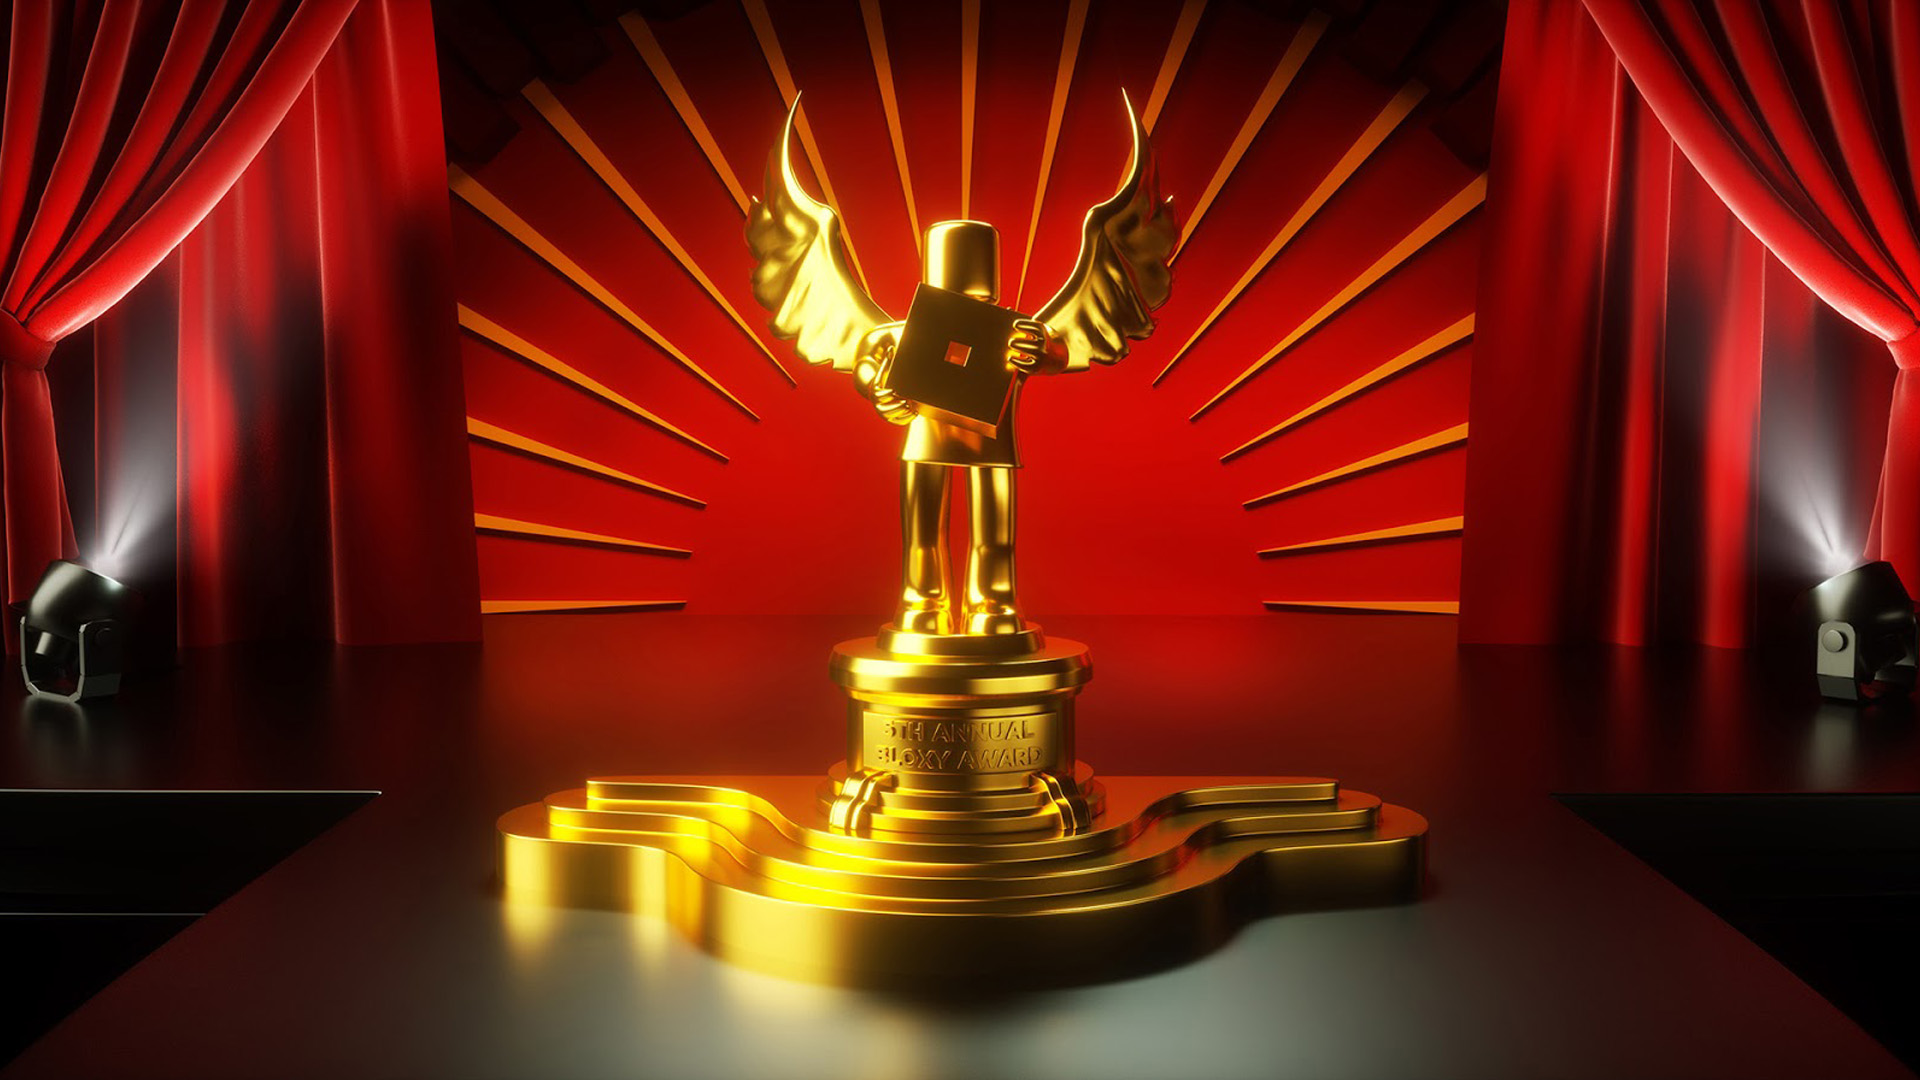 5th Annual Bloxy Awards